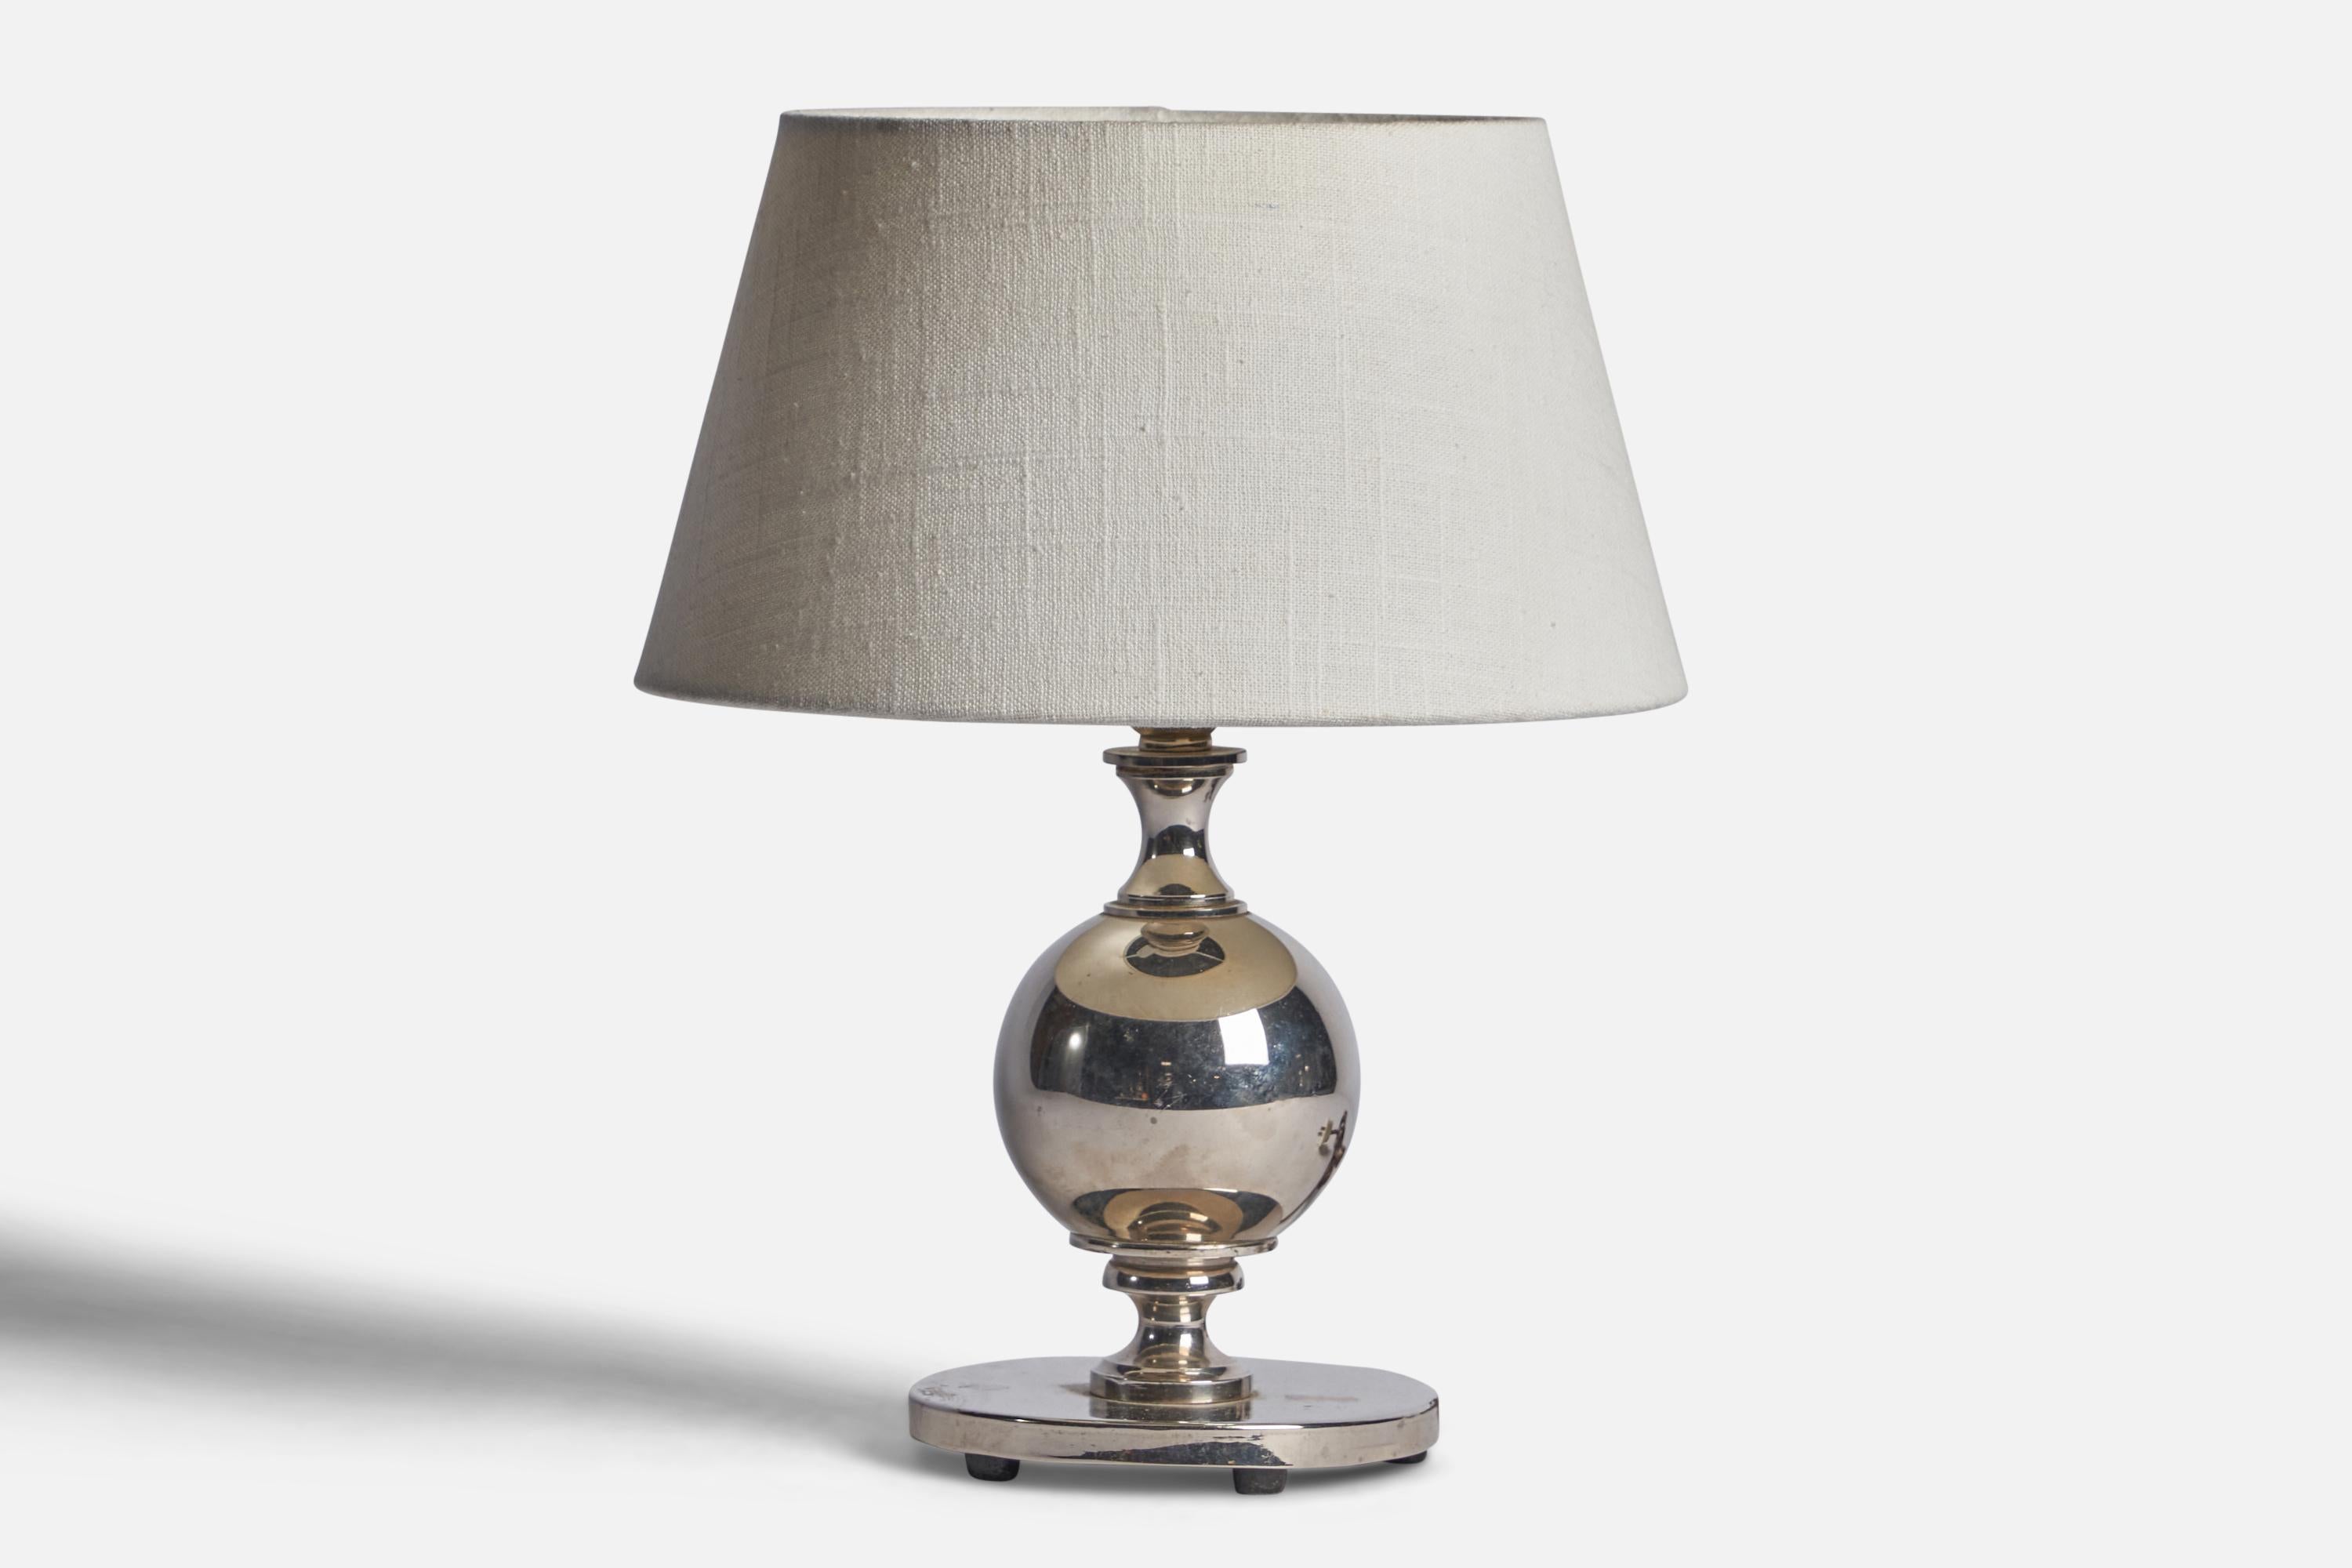 A silver plate table lamp designed and produced in Sweden, c. 1930s.

Dimensions of Lamp (inches): 10” H x 5” Diameter
Dimensions of Shade (inches): 7” Top Diameter x 10” Bottom Diameter x 5.5” H 
Dimensions of Lamp with Shade (inches): 13” H x 10”